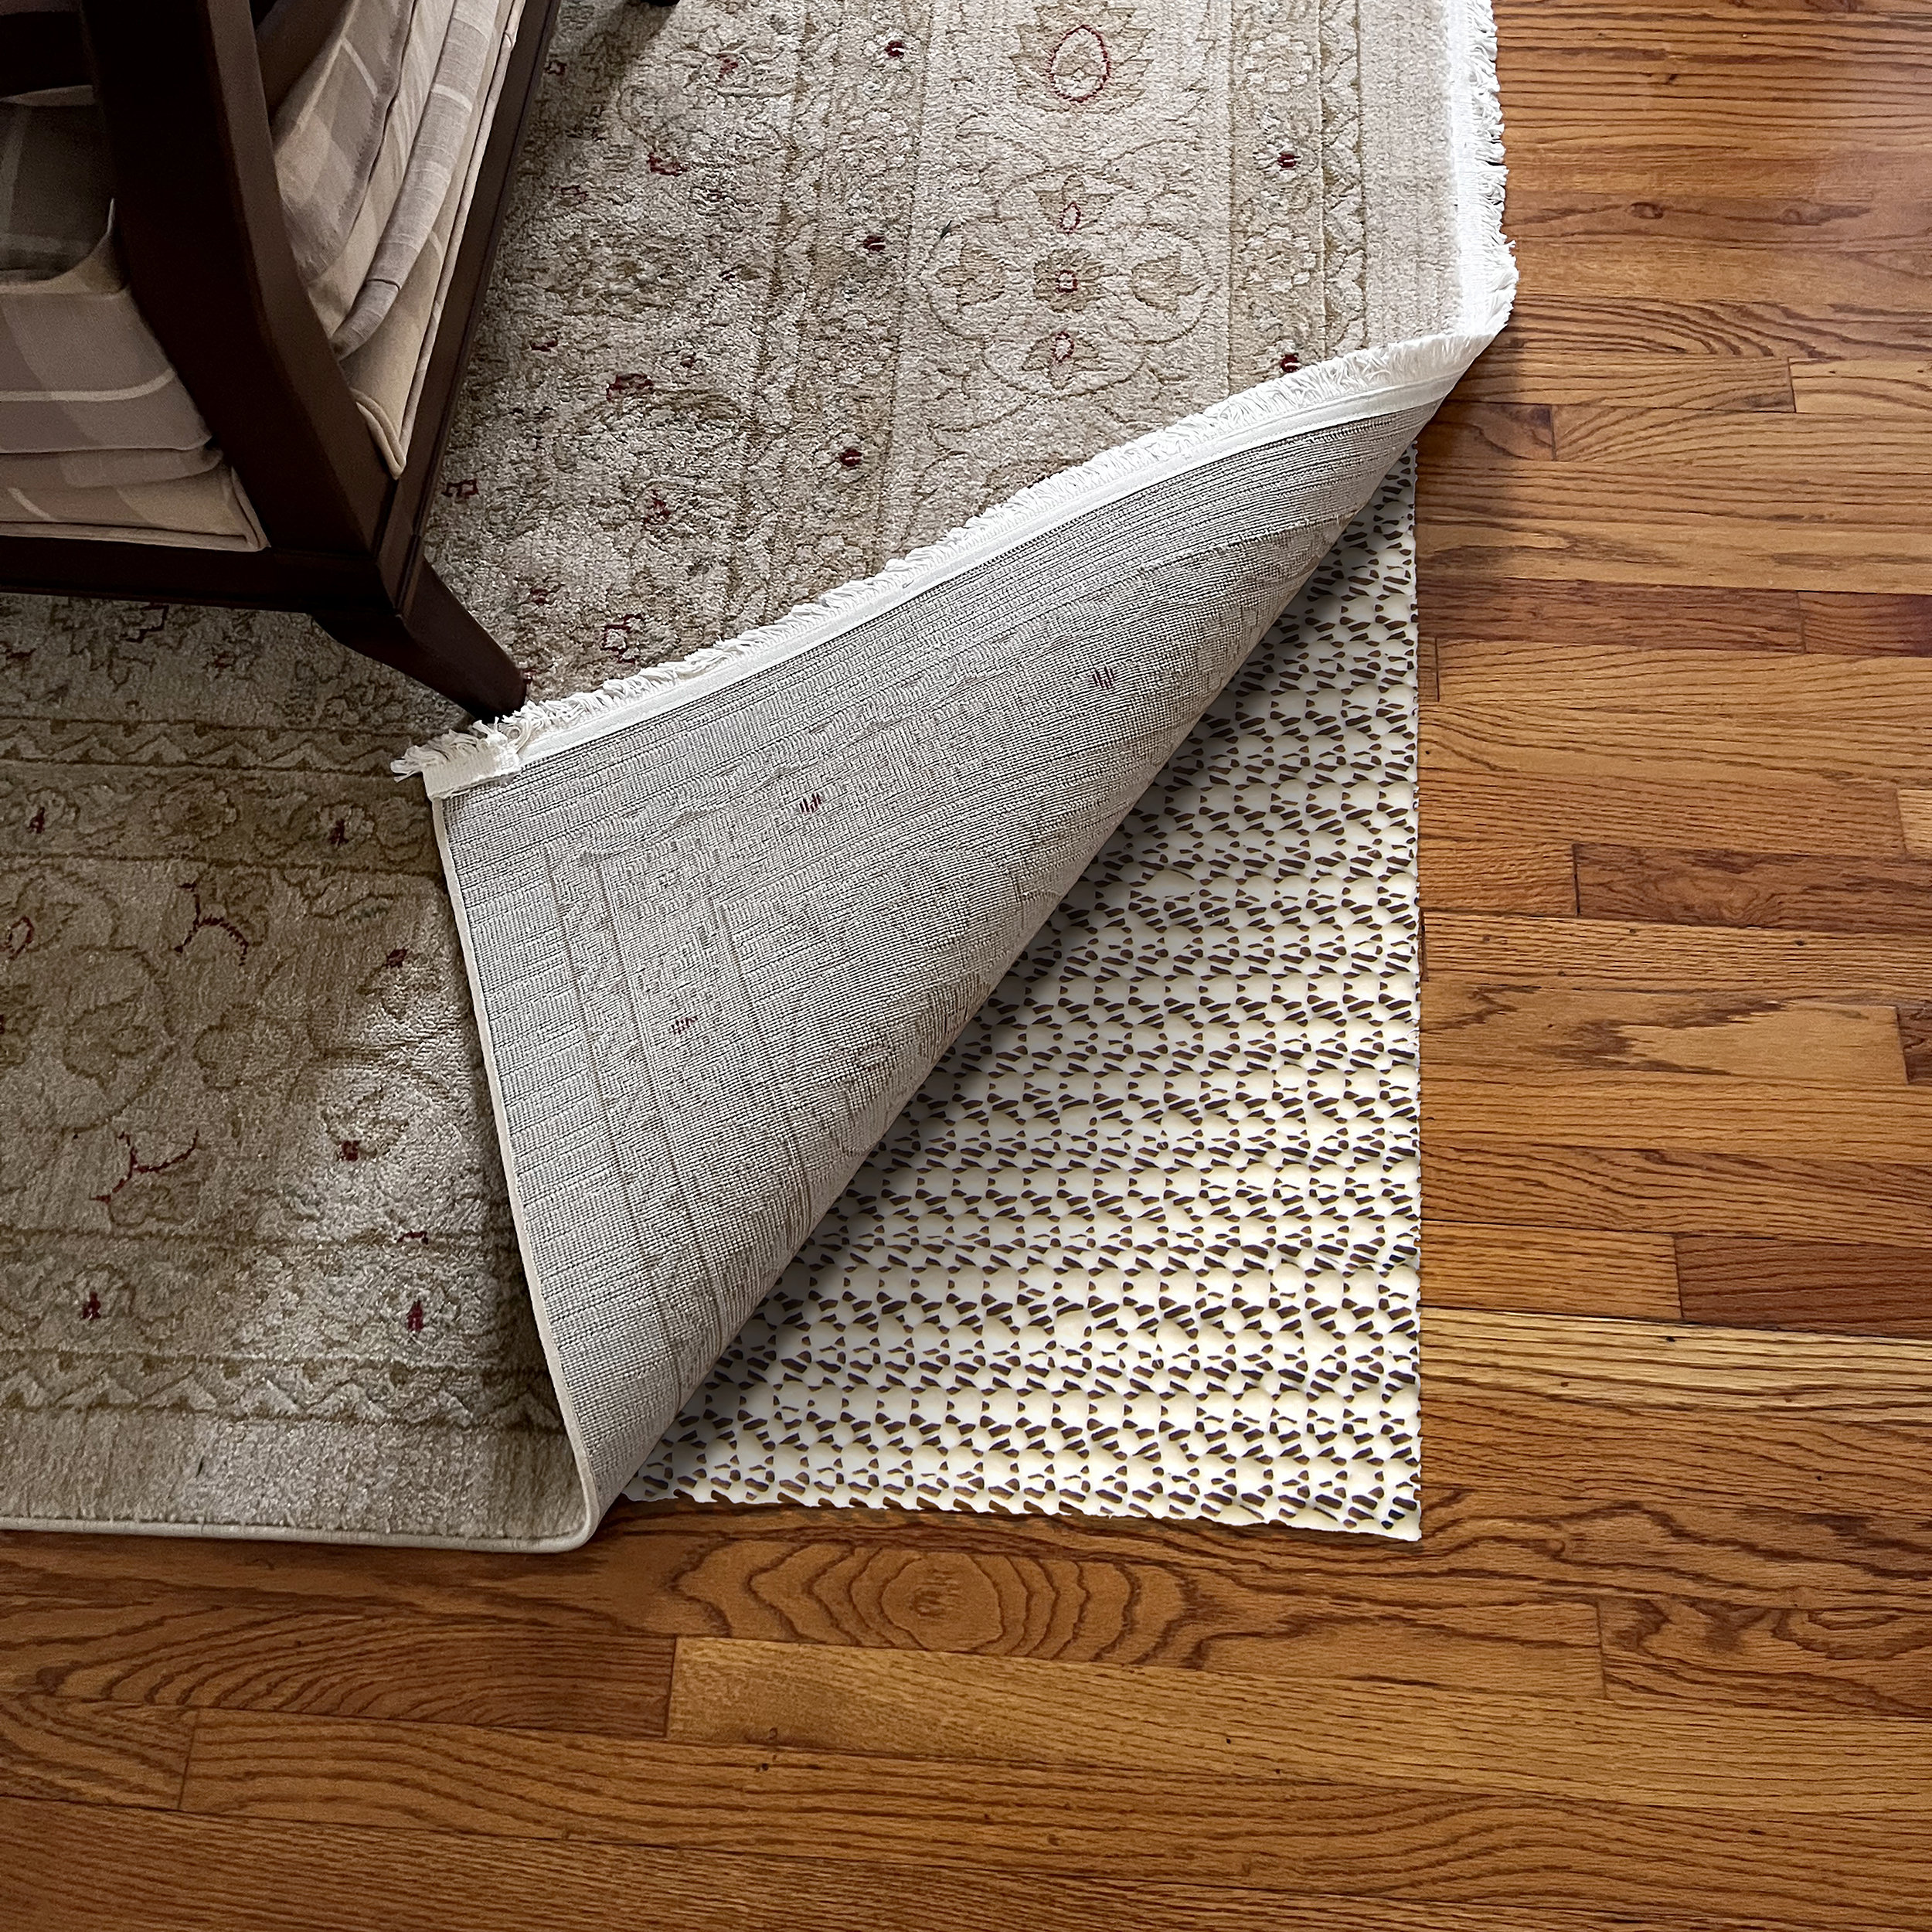 3x5 Rug Pad, Under Rug Gripper, Non Slip Rug Pads for Hardwood Floors, for Indoor Area Rugs or Outdoor Rugs